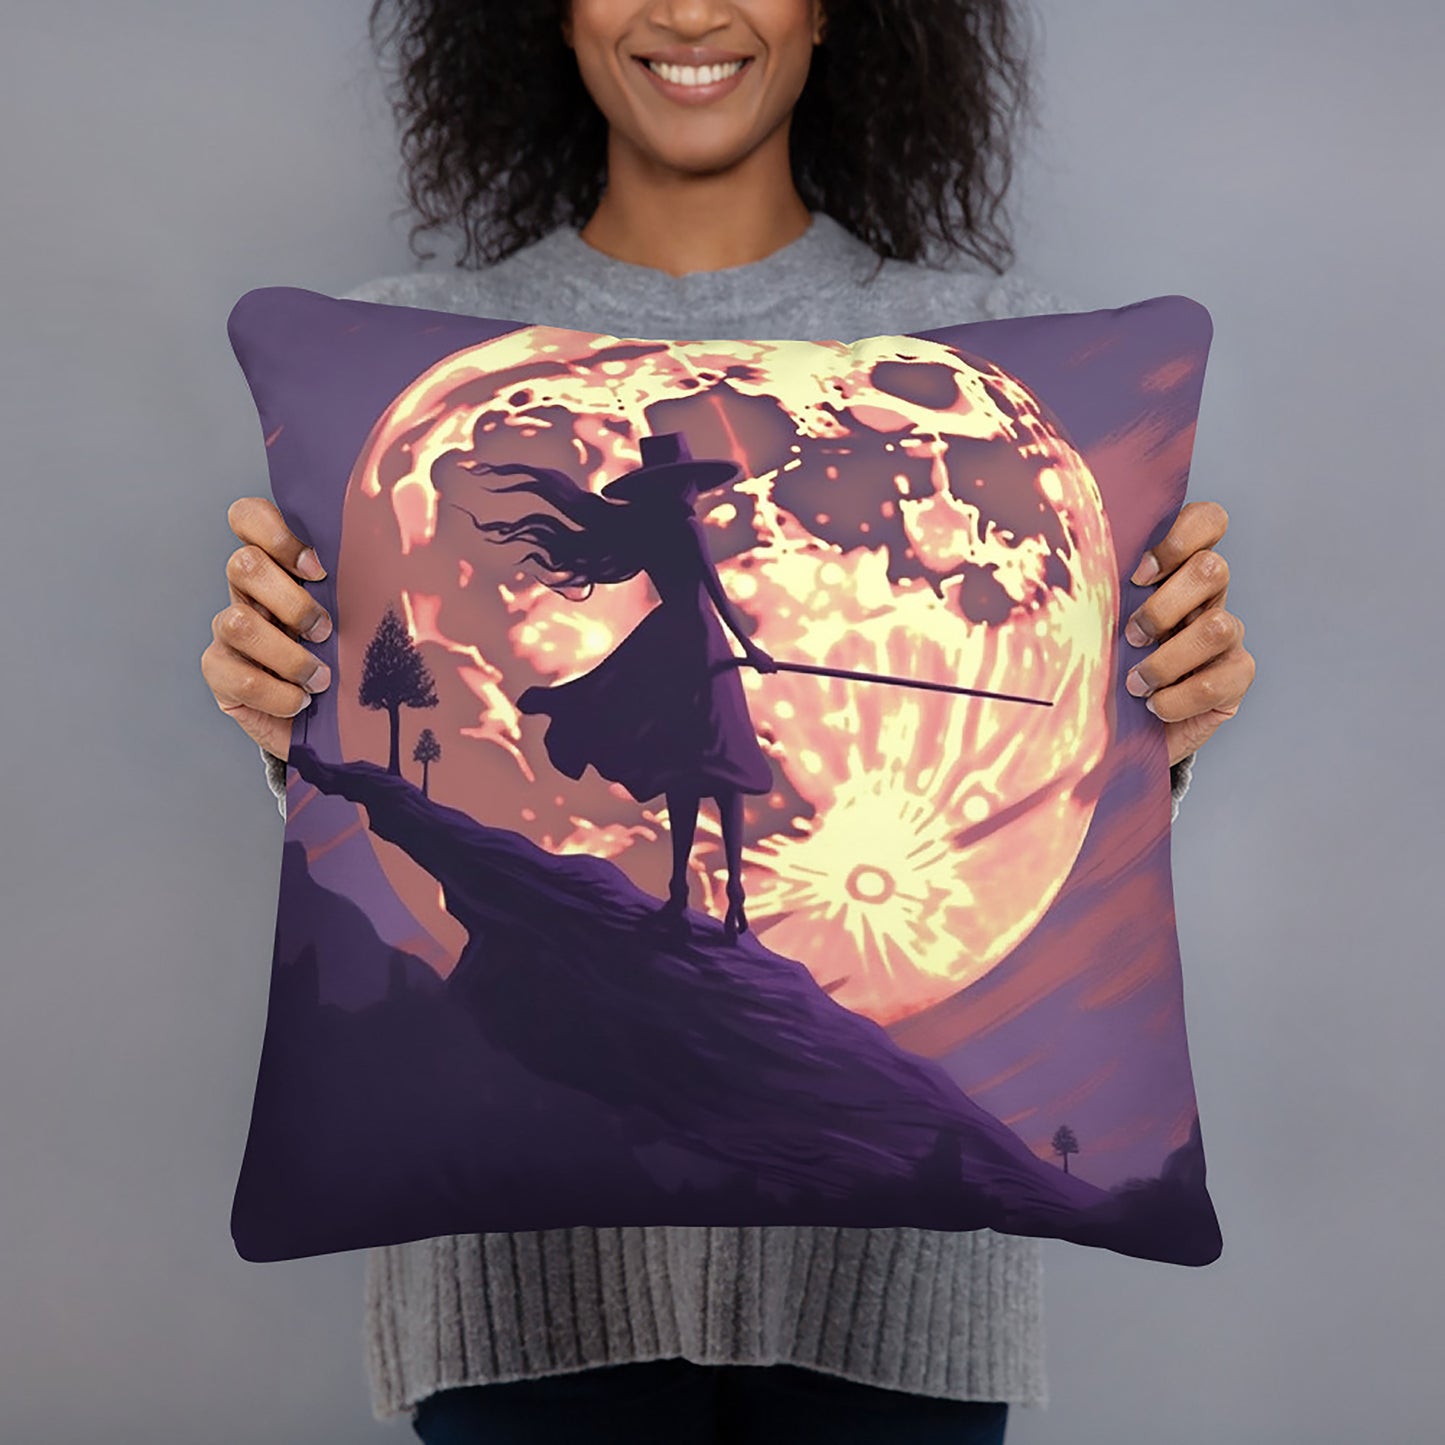 Halloween Throw Pillow Mystical Moonlit Witch Polyester Decorative Cushion 18x18